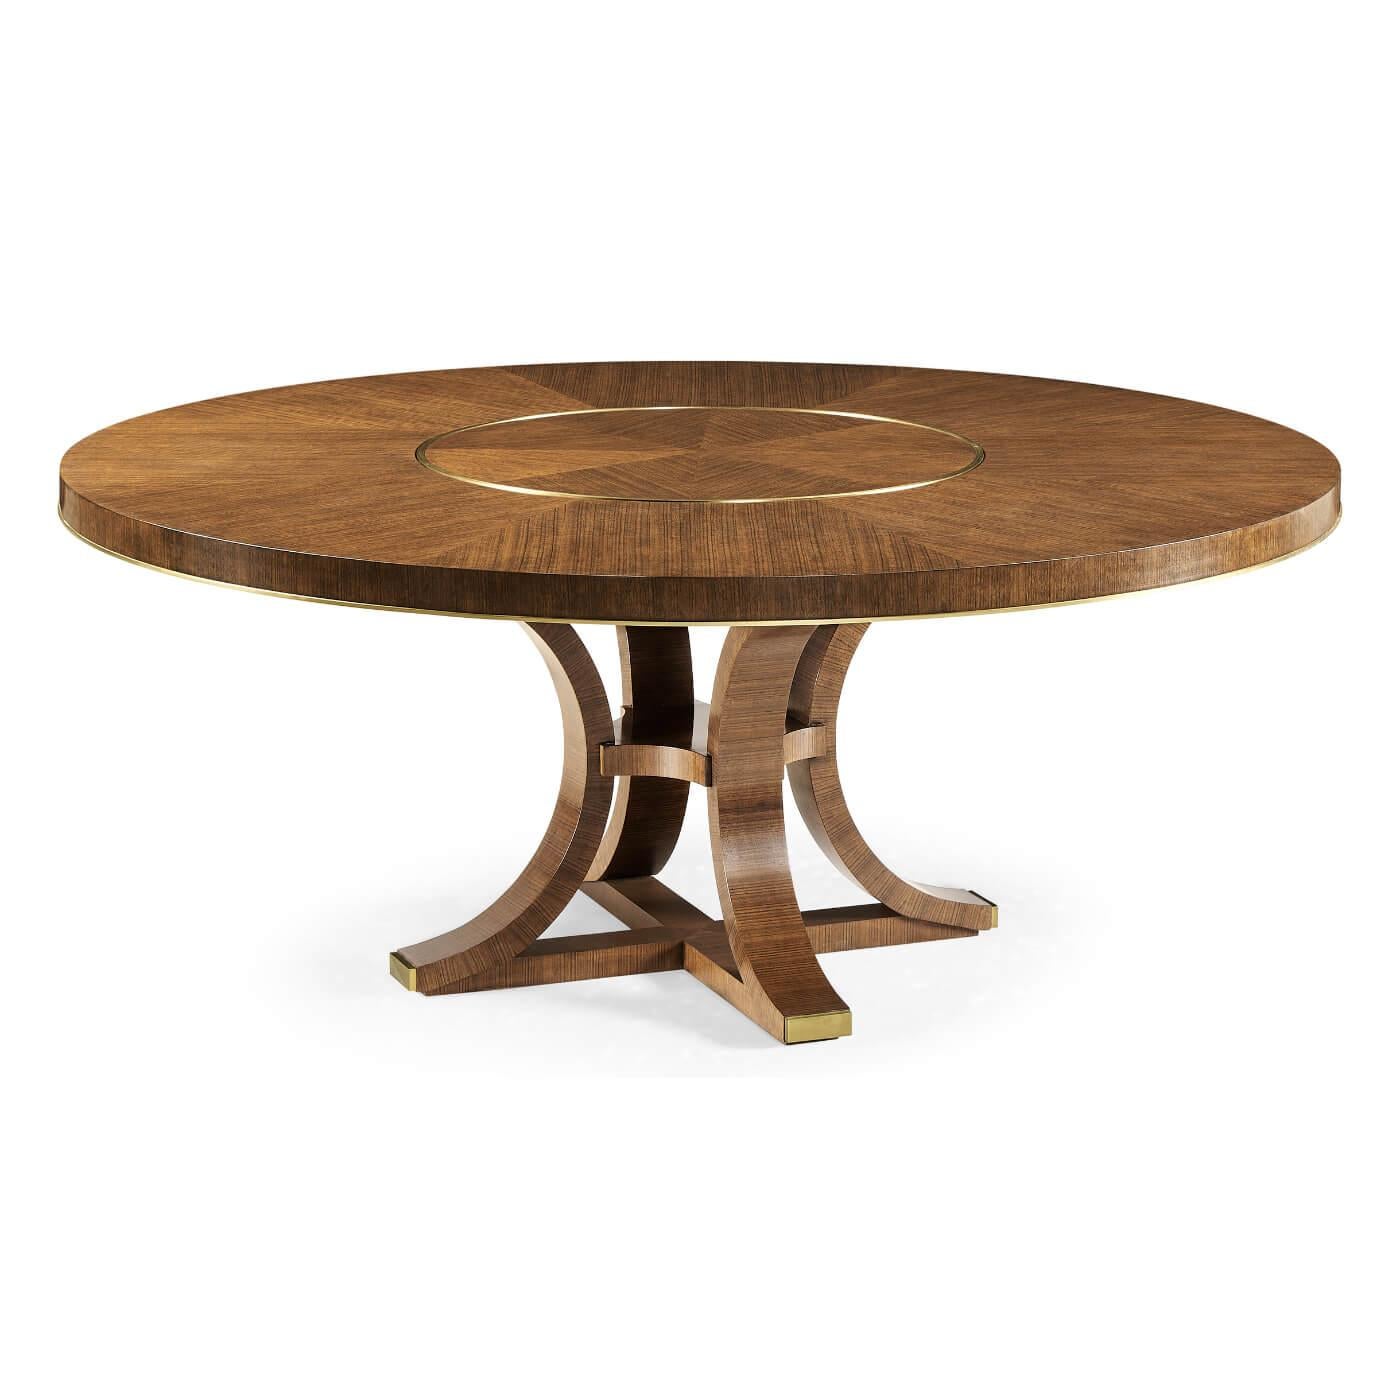 A midcentury style round dining table with in-built lazy Susan, veneered in a decorative hyedua with a raised brass inlay detail, set on elegantly curved supports terminating in brass caps.

Dimensions: 72